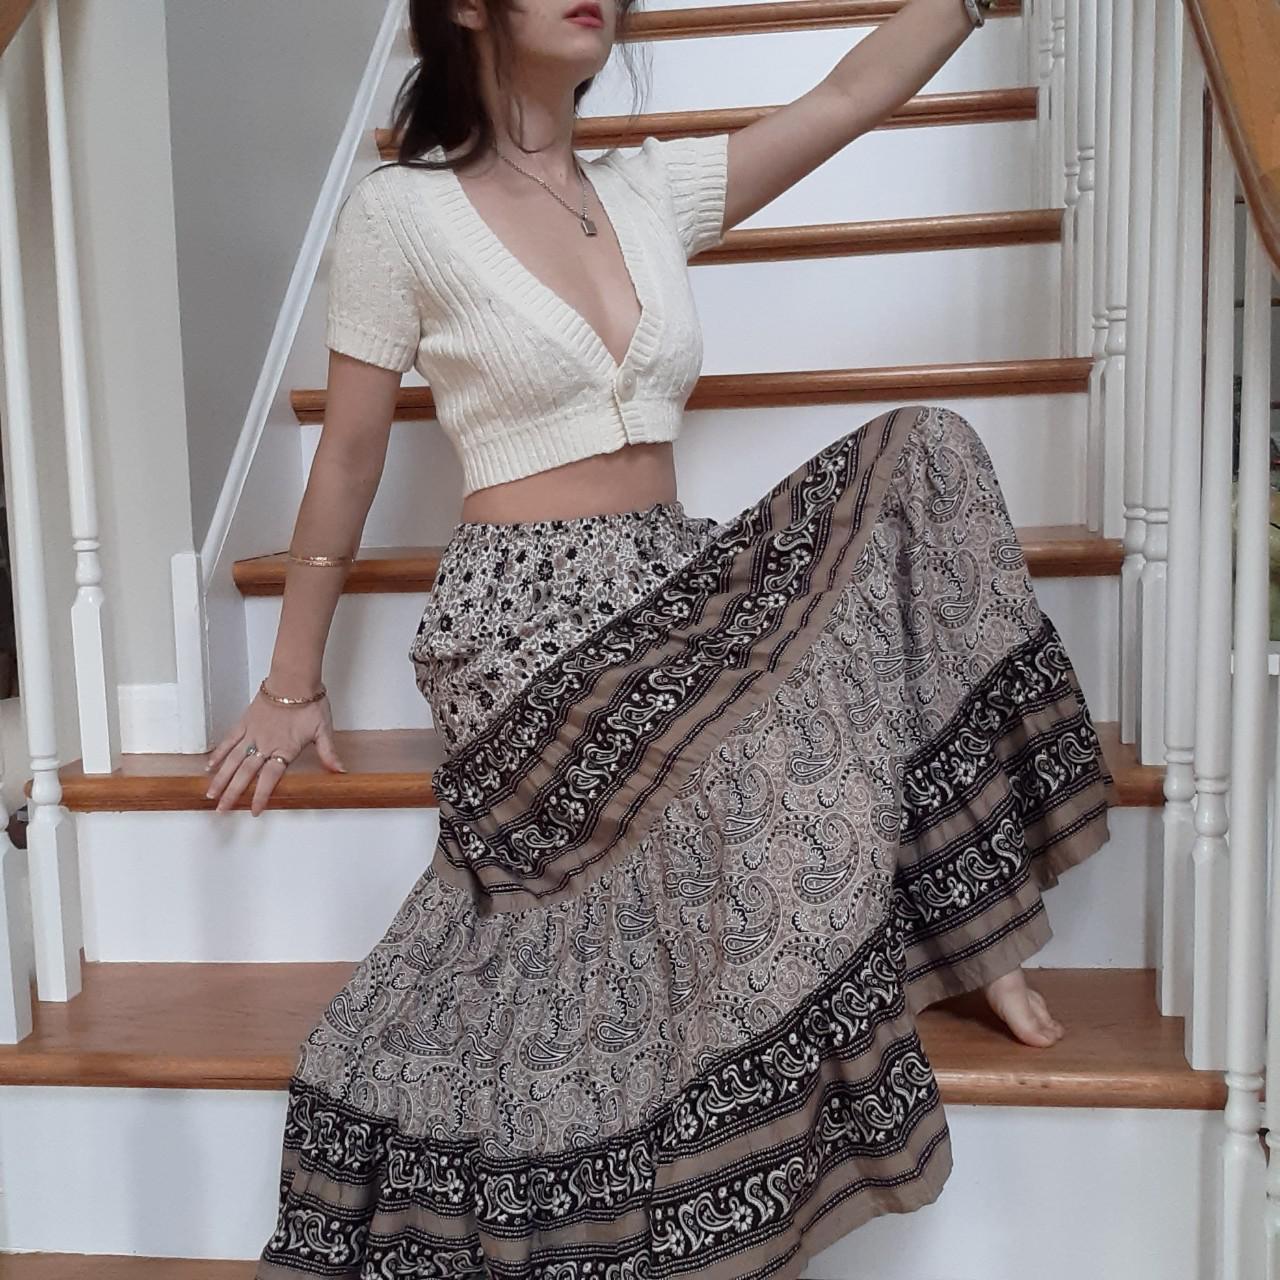 Product Image 1 - Boho brown Maxi skirt
The hippy